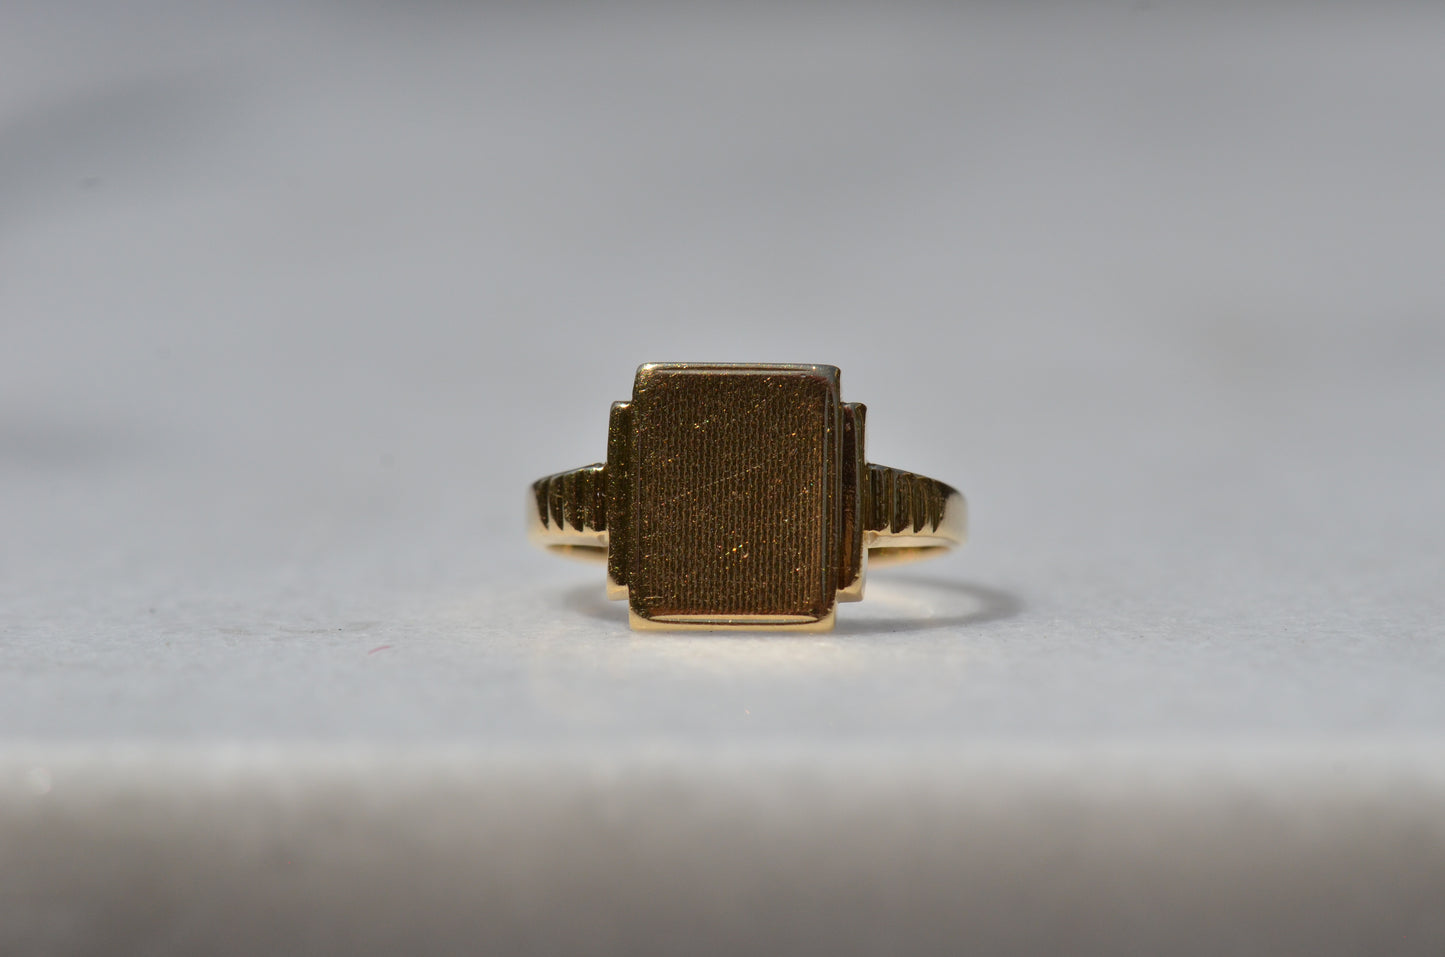 In diffused natural light, the wavy texture of the face of the signet is visible as well as light scratches and scuffs from nearly a century of wear. The ring is viewed head-on.